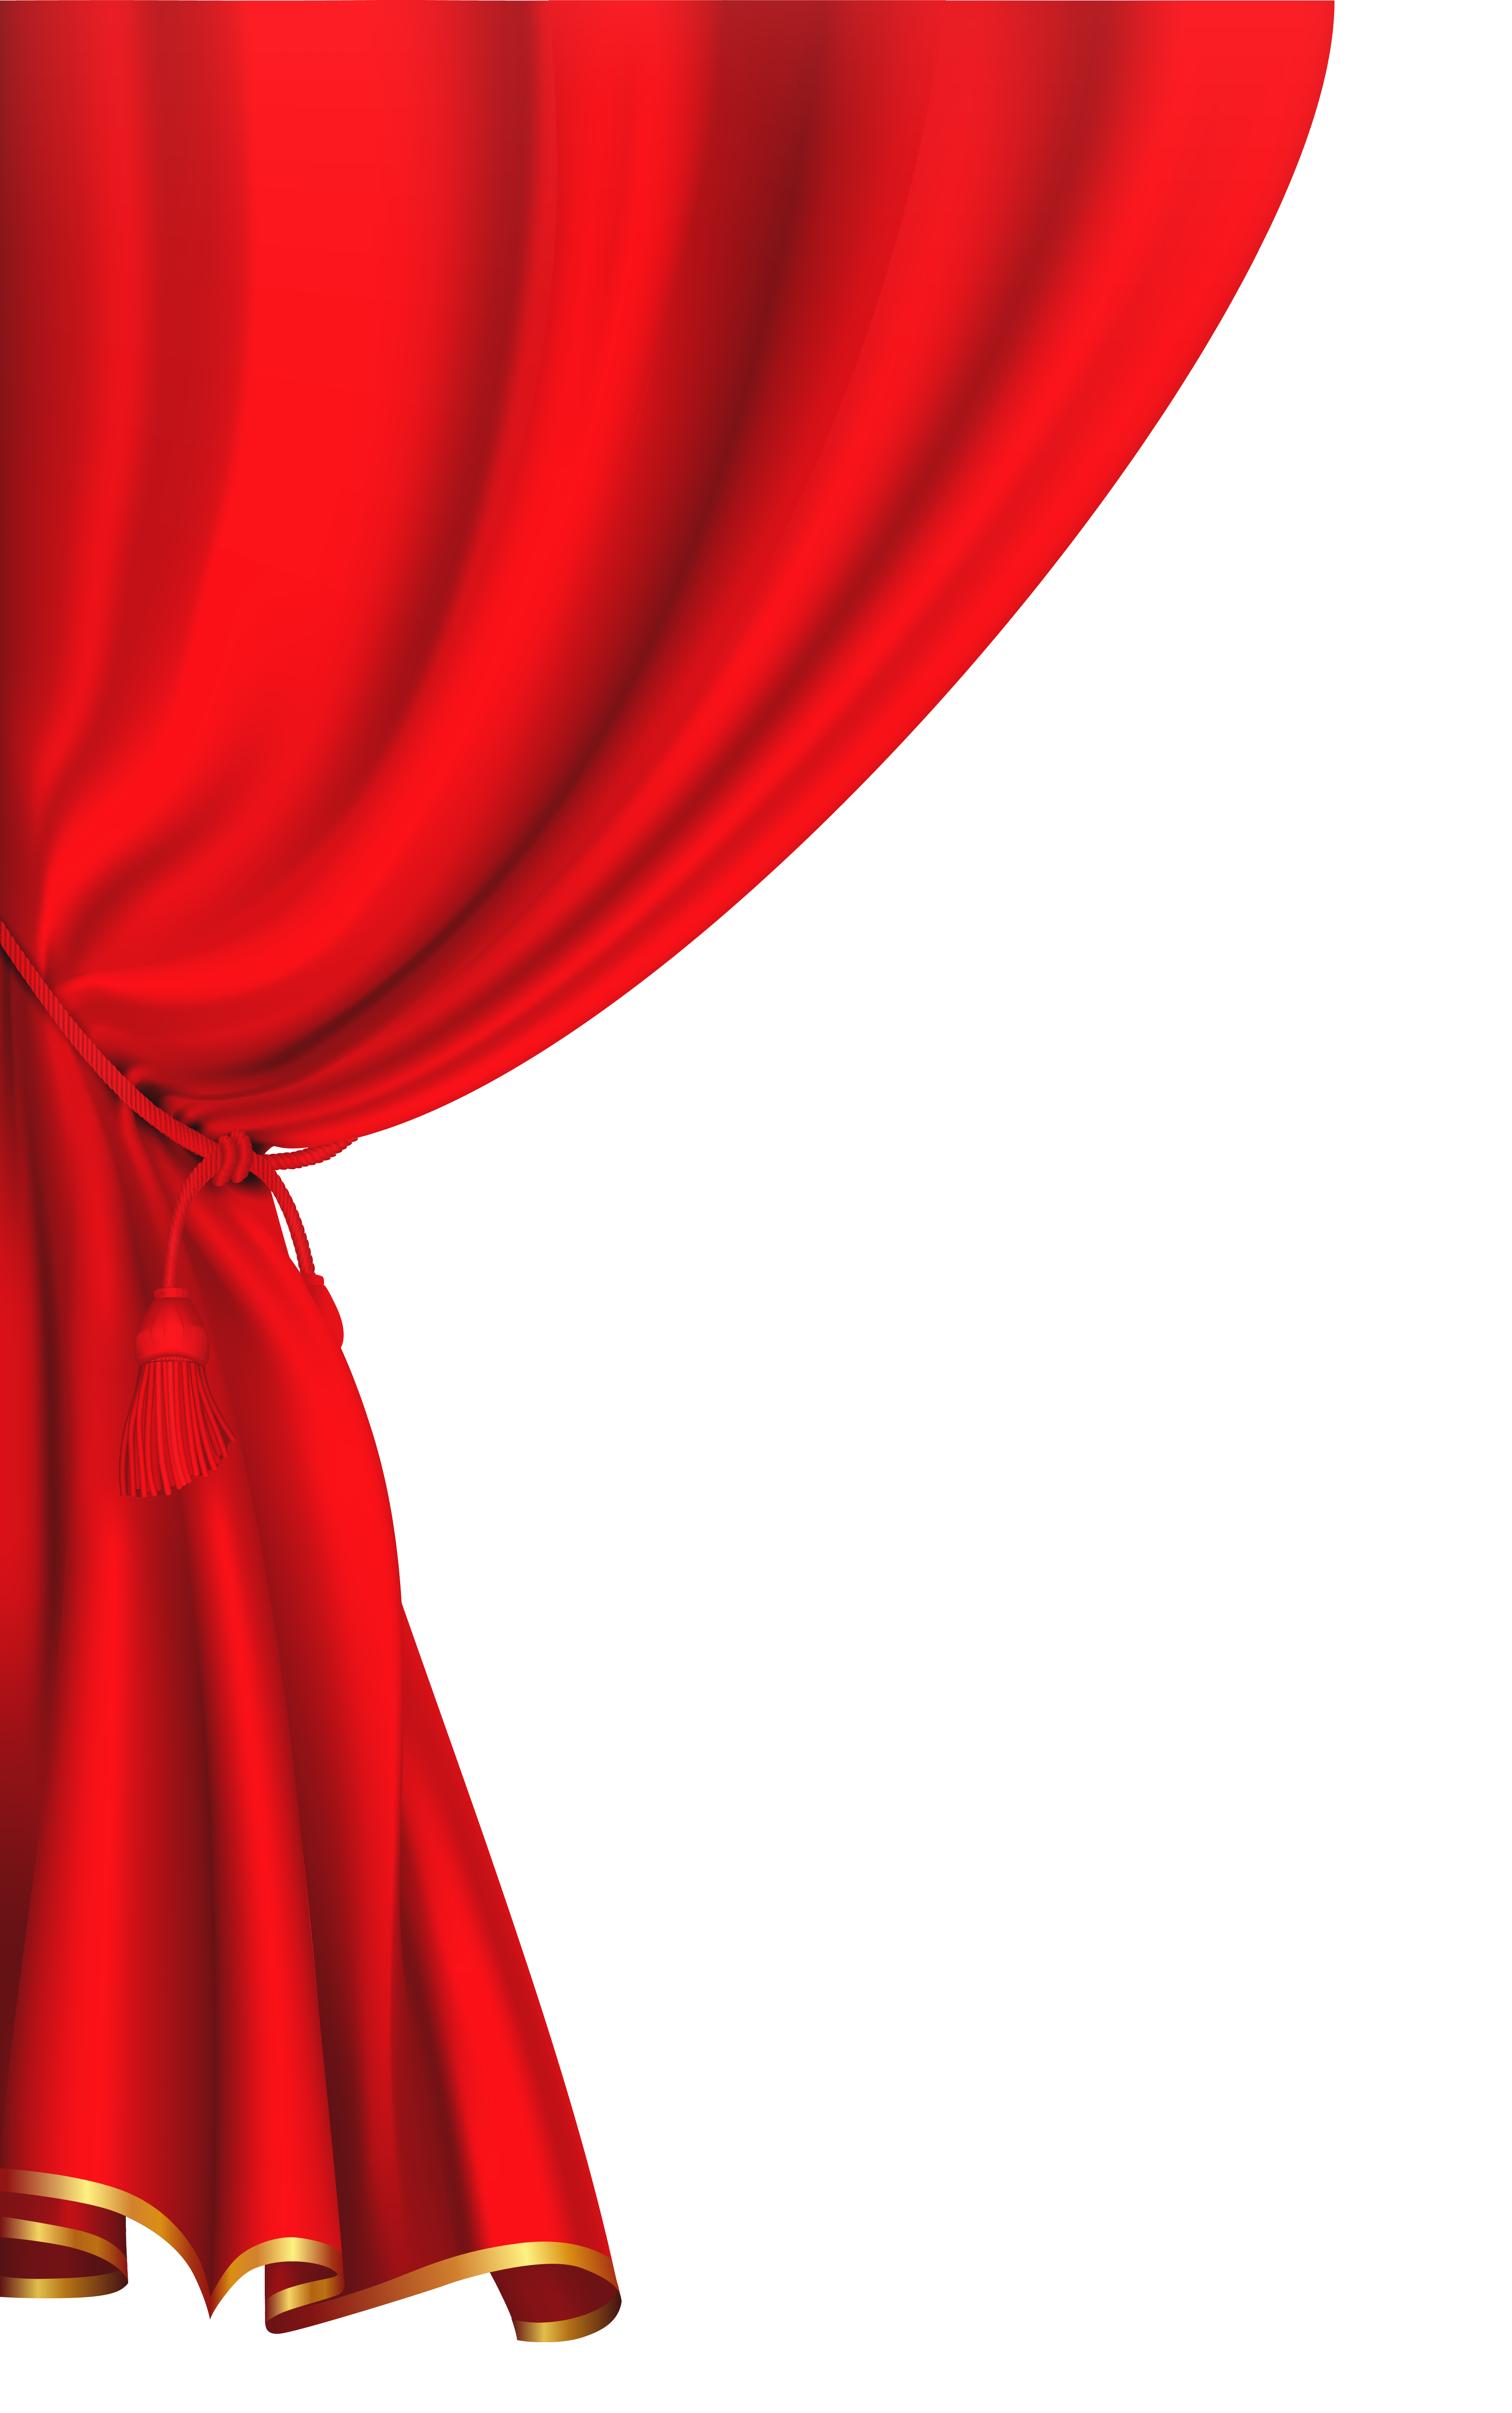 Curtains clipart. Red curtain image buda